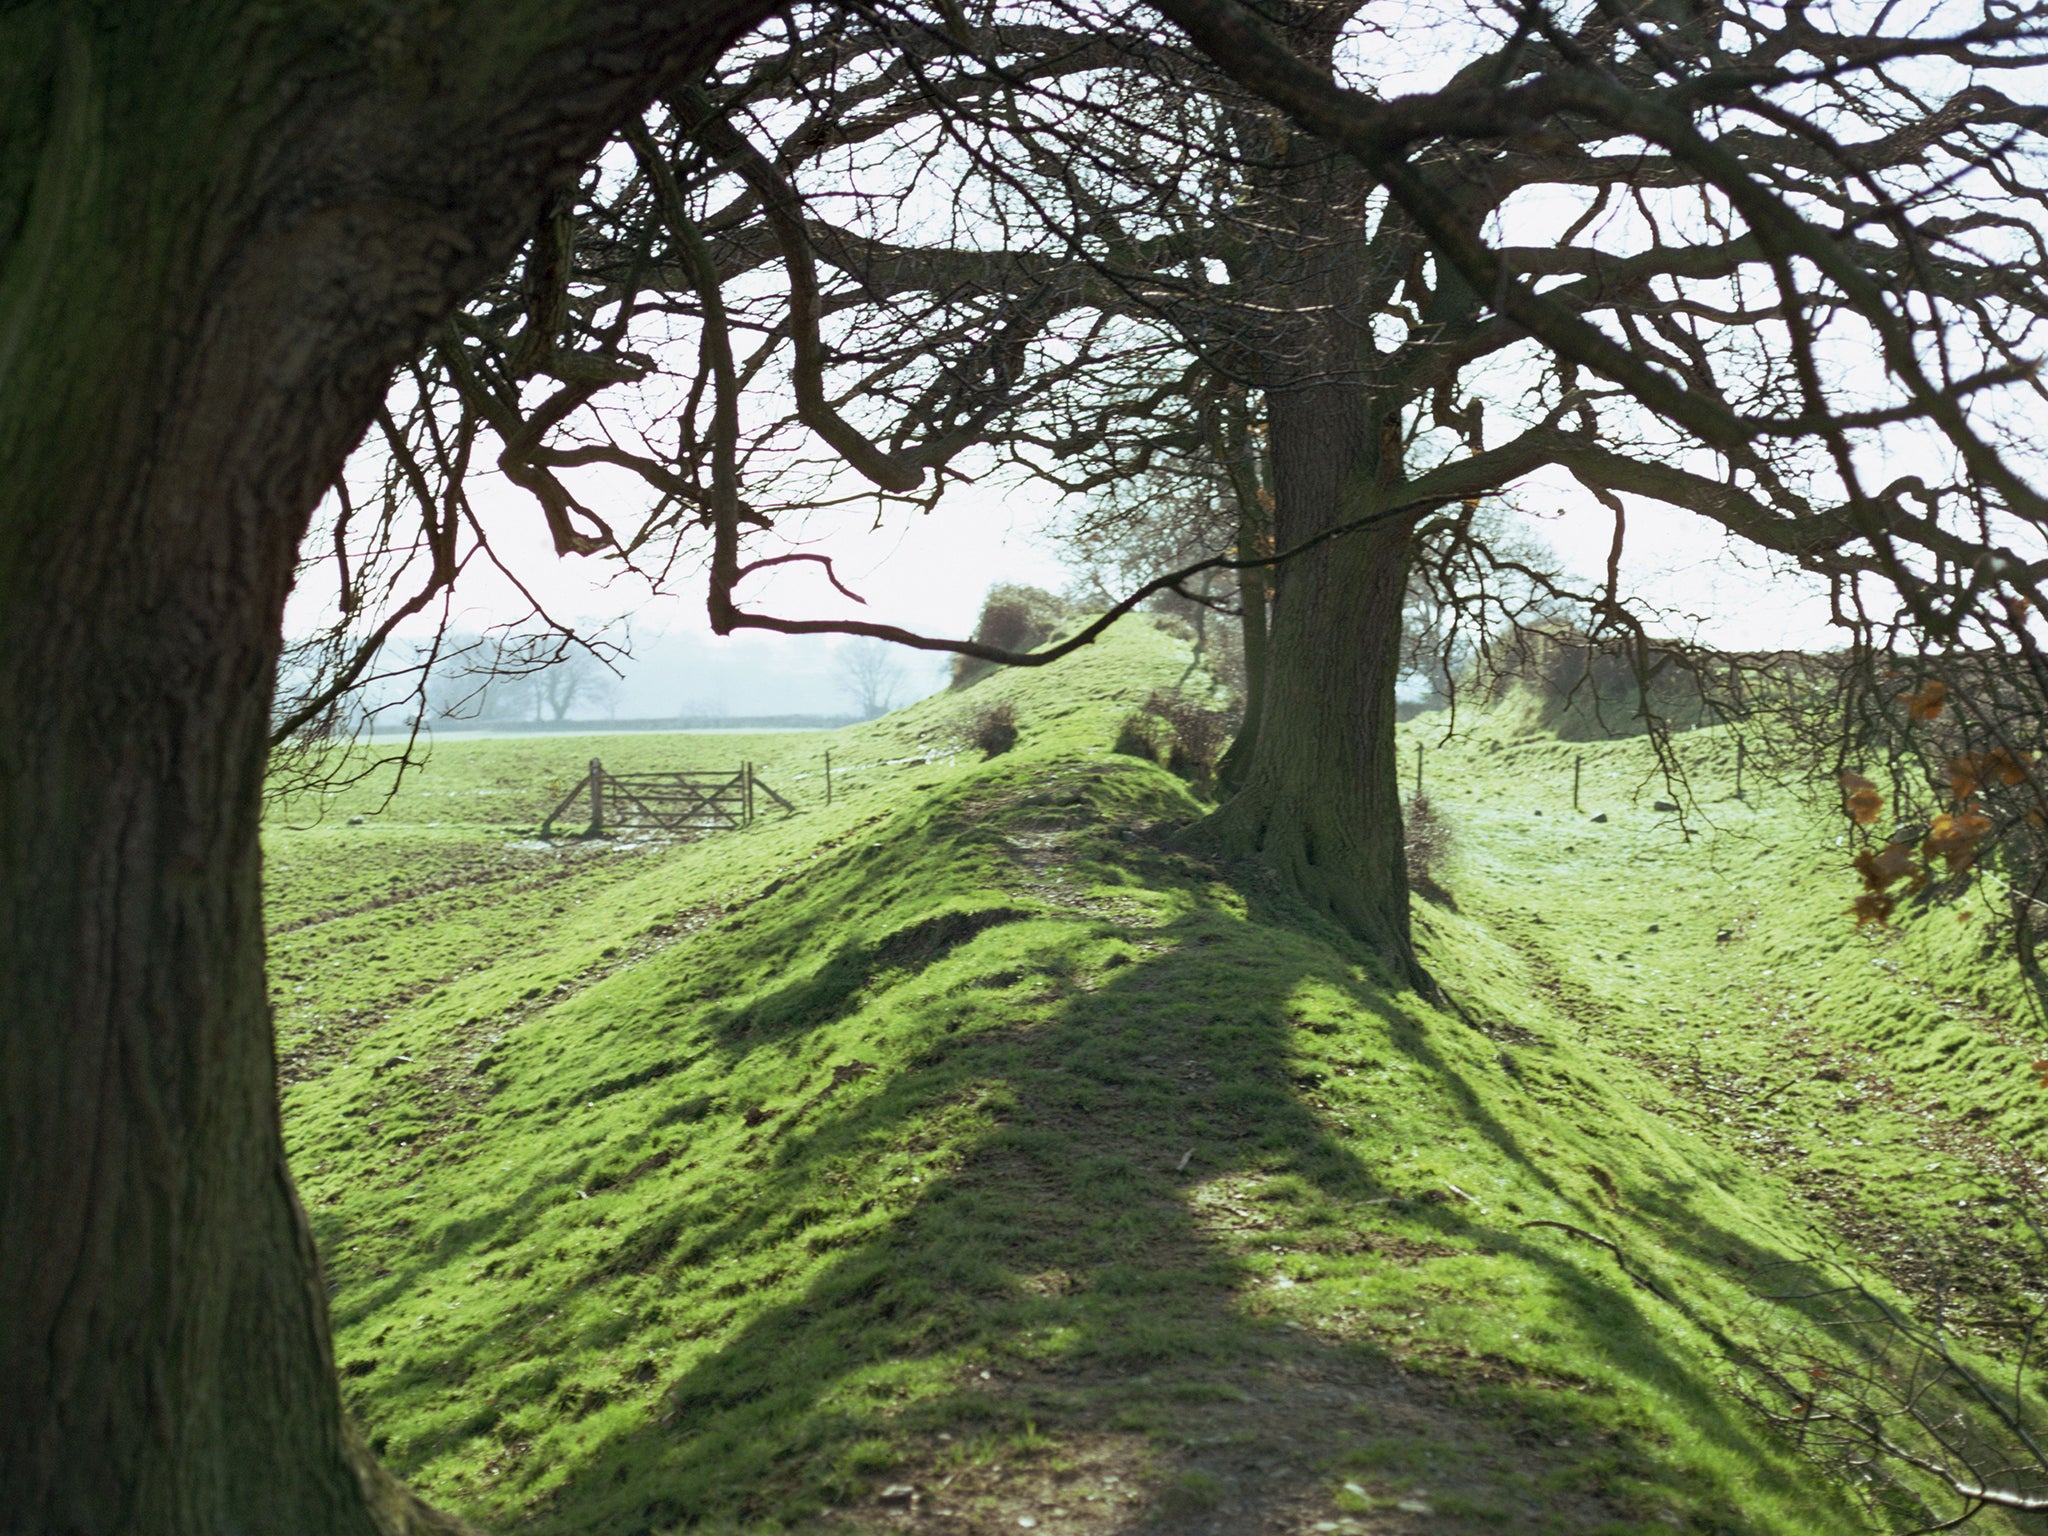 Offa’s Dyke has long been recognised as a natural border between England and Wales